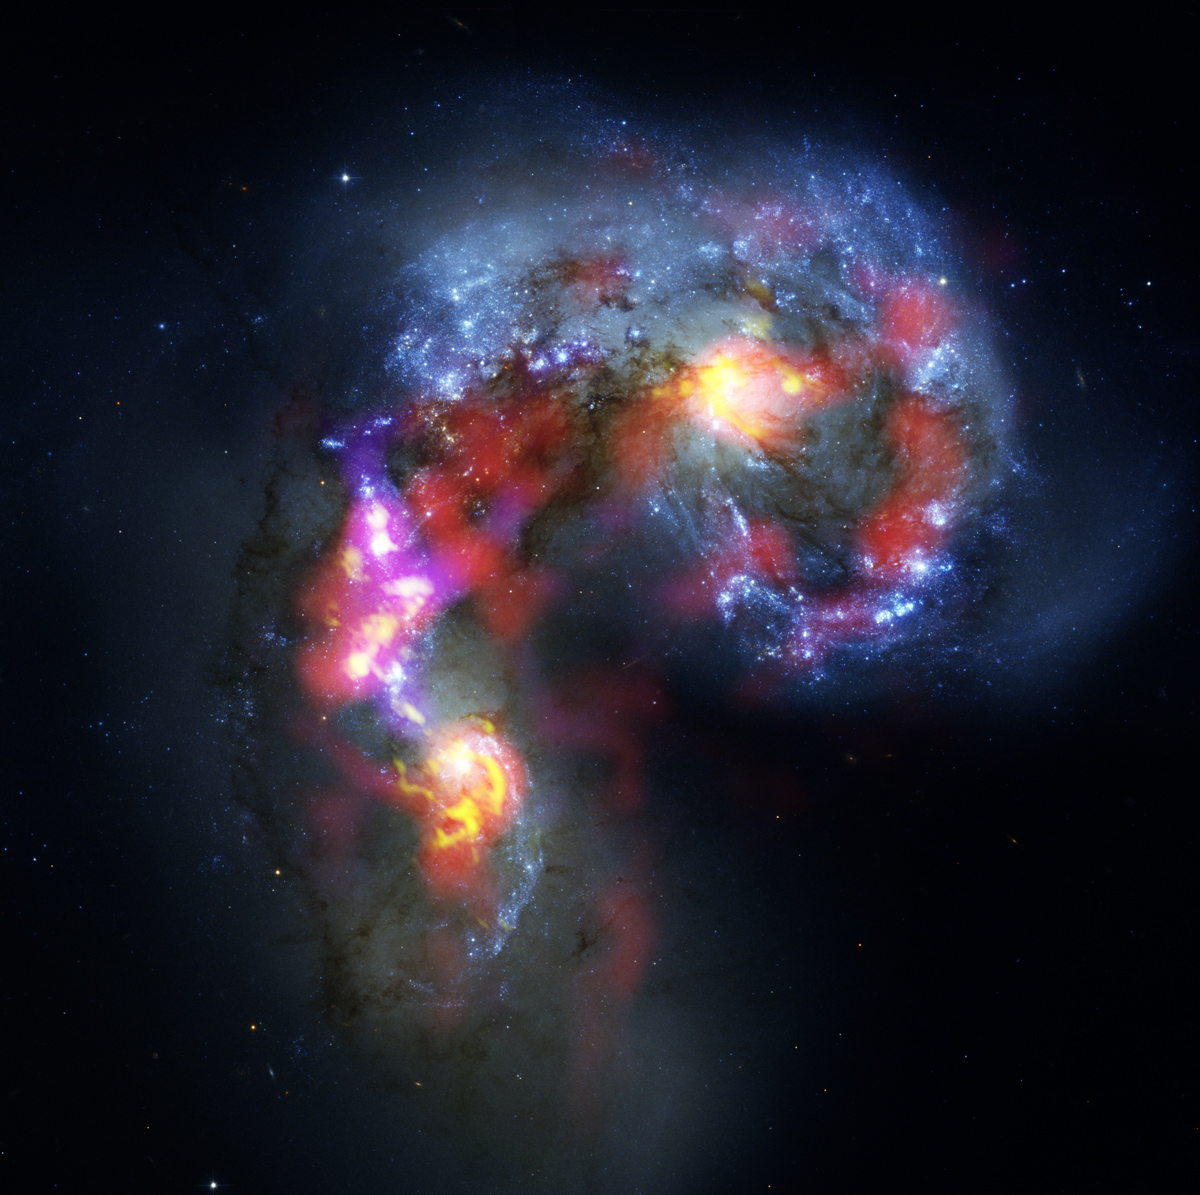 The Antennae Galaxies (also known as NGC 4038 and 4039) are a pair of distorted colliding spiral galaxies about 70 million light-years away, in the constellation of Corvus (The Crow). This view combines ALMA observations, made in two different wavelength ranges during the observatory’s early testing phase, with visible-light observations from the NASA/ESA Hubble Space Telescope. The Hubble image is the sharpest view of this object ever taken and serves as the ultimate benchmark in terms of resolution. ALMA observes at much longer wavelengths which makes it much harder to obtain comparably sharp images. However, when the full ALMA array is completed its vision will be up to ten times sharper than Hubble. Most of the ALMA test observations used to create this image were made using only twelve antennas working together — fewer than will be used for the first science observations — and much closer together as well. Both of these factors make the new image just a taster of what is to come. As the observatory grows, the sharpness, efficiency, and quality of its observations will increase dramatically as more antennas become available and the array grows in size. This is nevertheless the best submillimeter-wavelength image ever taken of the Antennae Galaxies and opens a new window on the submillimeter Universe. While visible light — shown here mainly in blue — reveals the newborn stars in the galaxies, ALMA’s view shows us something that cannot be seen at those wavelengths: the clouds of dense cold gas from which new stars form. The ALMA observations — shown here in red, pink and yellow — were made at specific wavelengths of millimeter and submillimeter light (ALMA bands 3 and 7), tuned to detect carbon monoxide molecules in the otherwise invisible hydrogen clouds, where new stars are forming. Massive concentrations of gas are found not only in the hearts of the two galaxies but also in the chaotic region where they are colliding. Here, the total amount of gas is billions of times the mass of the Sun — a rich reservoir of material for future generations of stars. Observations like these will be vital in helping us understand how galaxy collisions can trigger the birth of new stars. This is just one example of how ALMA reveals parts of the Universe that cannot be seen with visible-light and infrared telescopes. Credit: ALMA (ESO/NAOJ/NRAO). Visible light image: the NASA/ESA Hubble Space Telescope